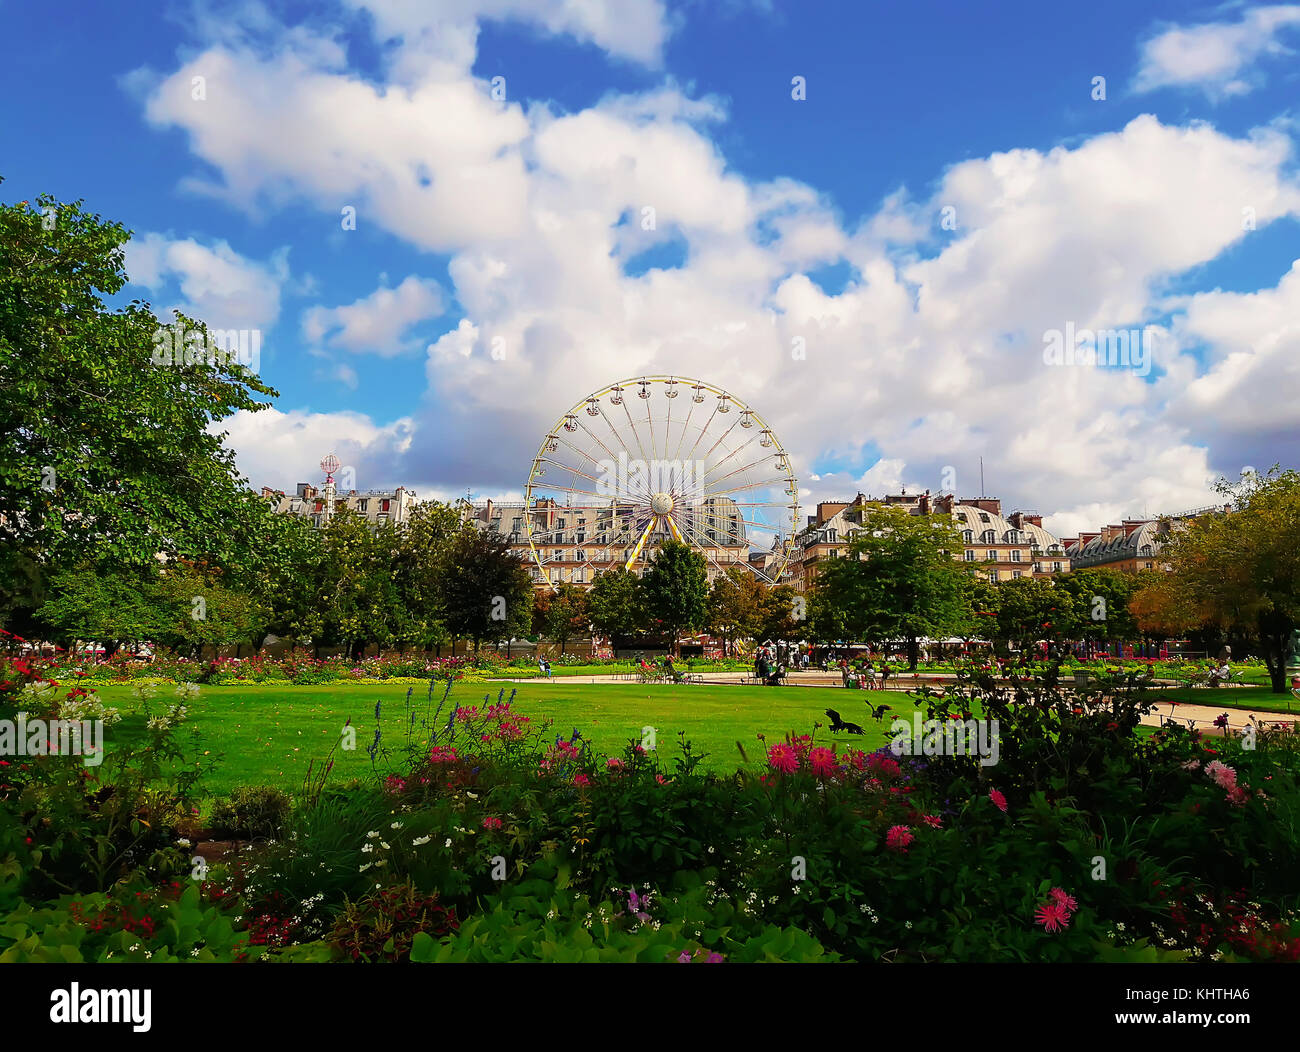 Landscape of Tuileries garden with Ferris wheel in a sunny summer day, Paris, France. Stock Photo